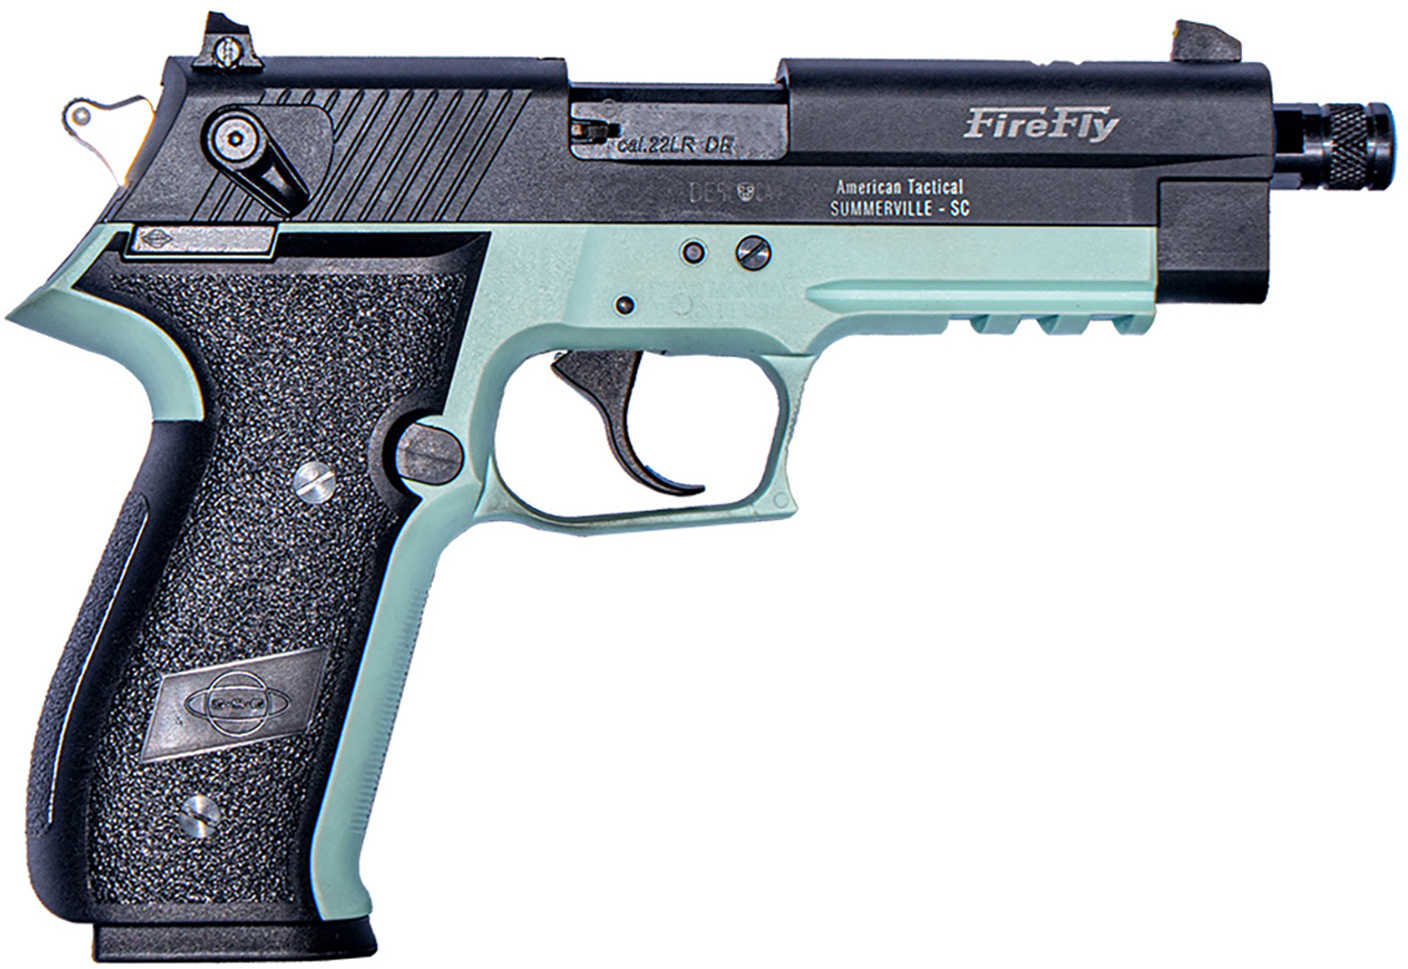 American Tactical Inc. Firefly Semi-Automatic Pistol .22 Long Rifle 4.9" Threaded, Rifled Barrel (1)-10Rd Single Stack Magazine Adjustable Rear Sights Black Slide And Grips Mint Green Finish